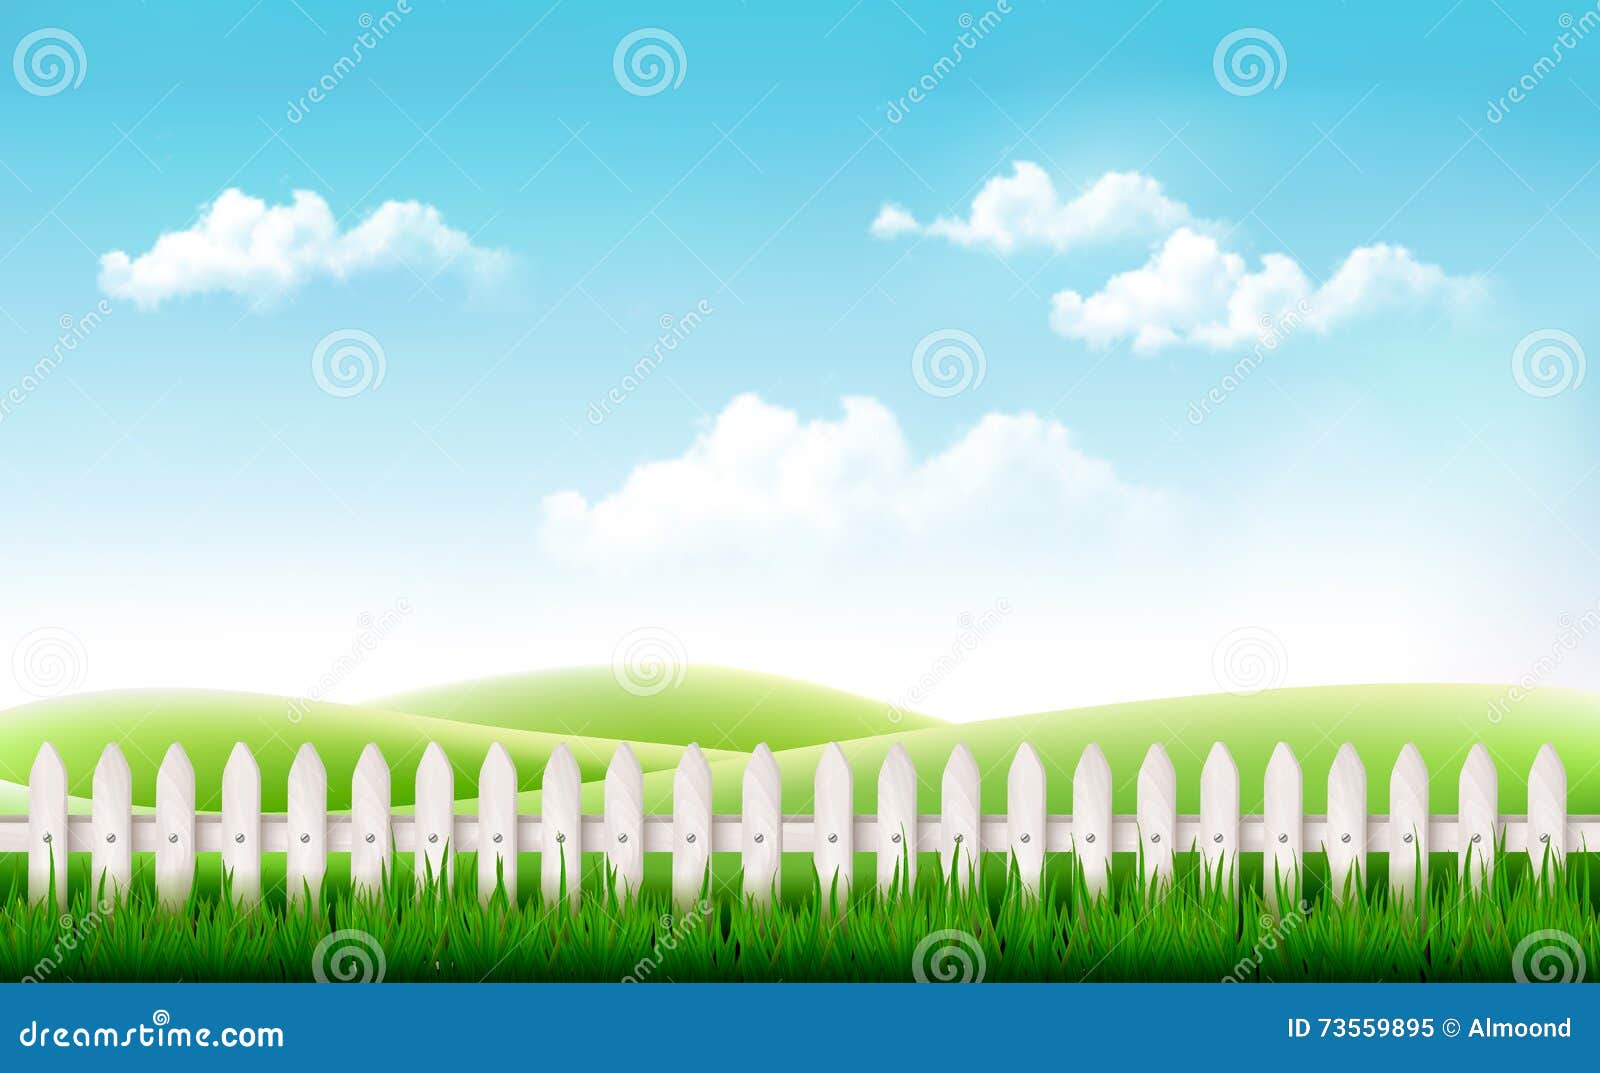 white fence in nature summer background.